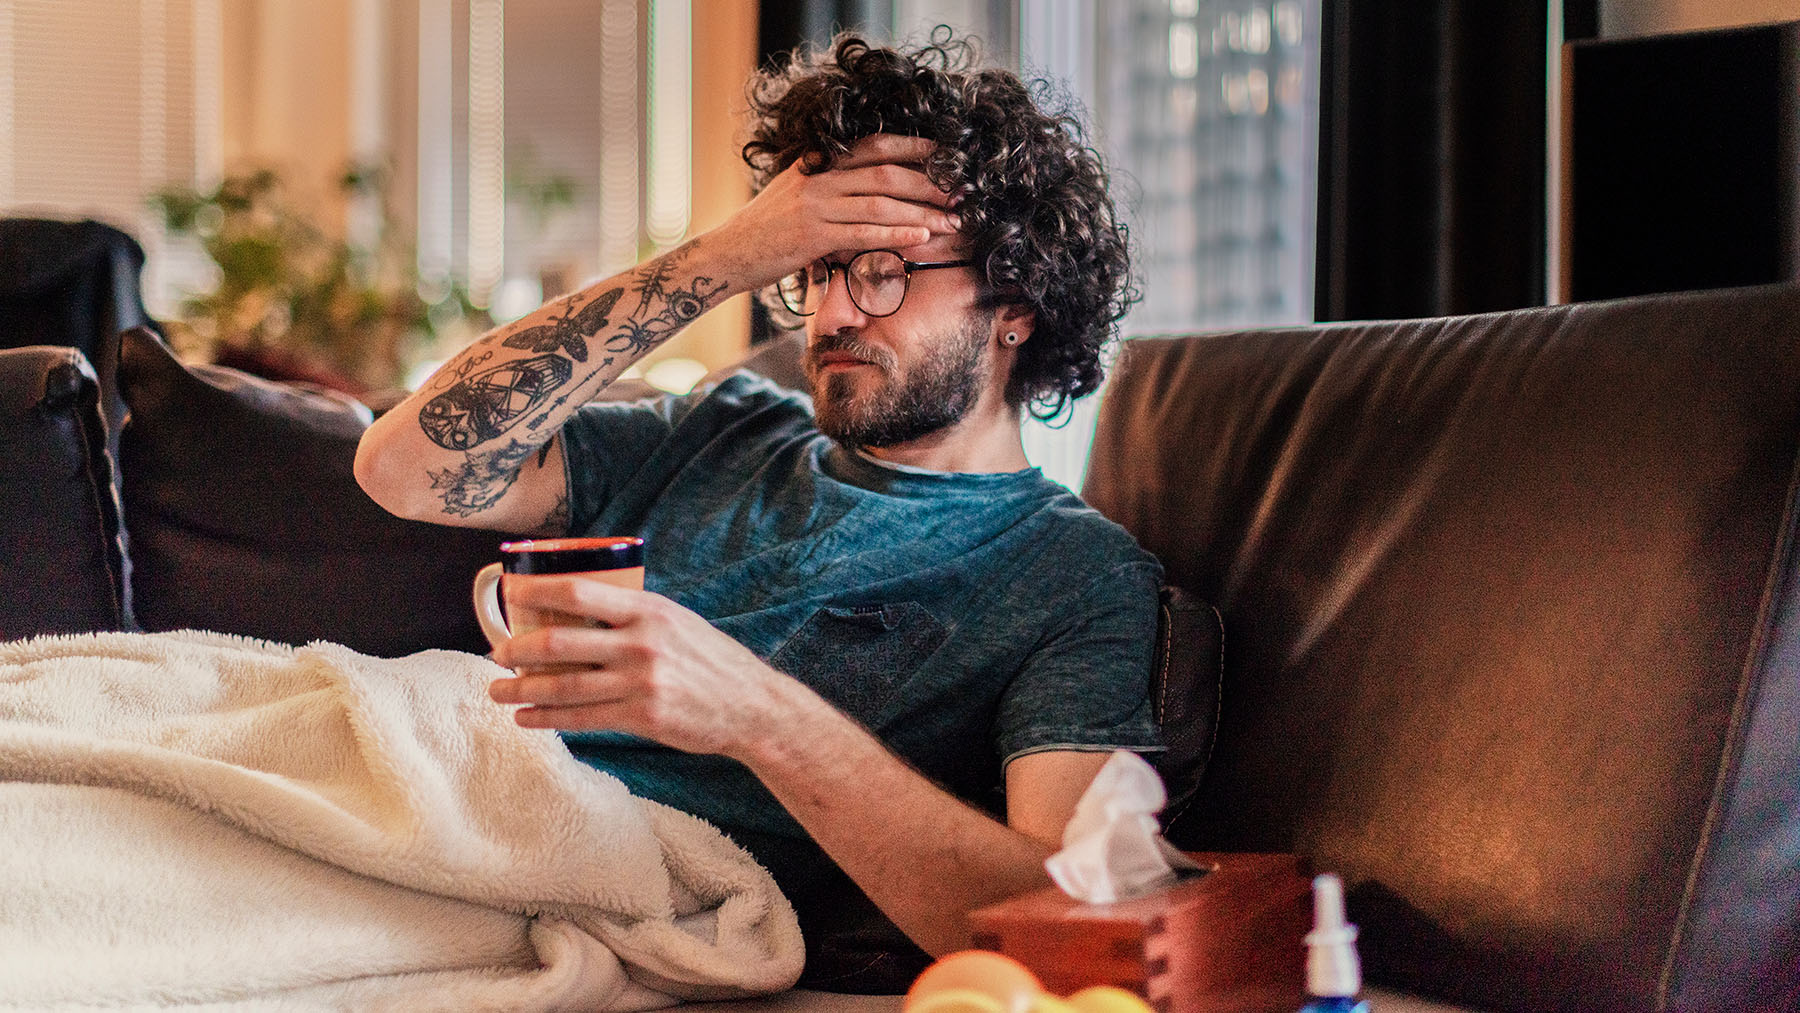 Man with tatooed arm feels sick on couch